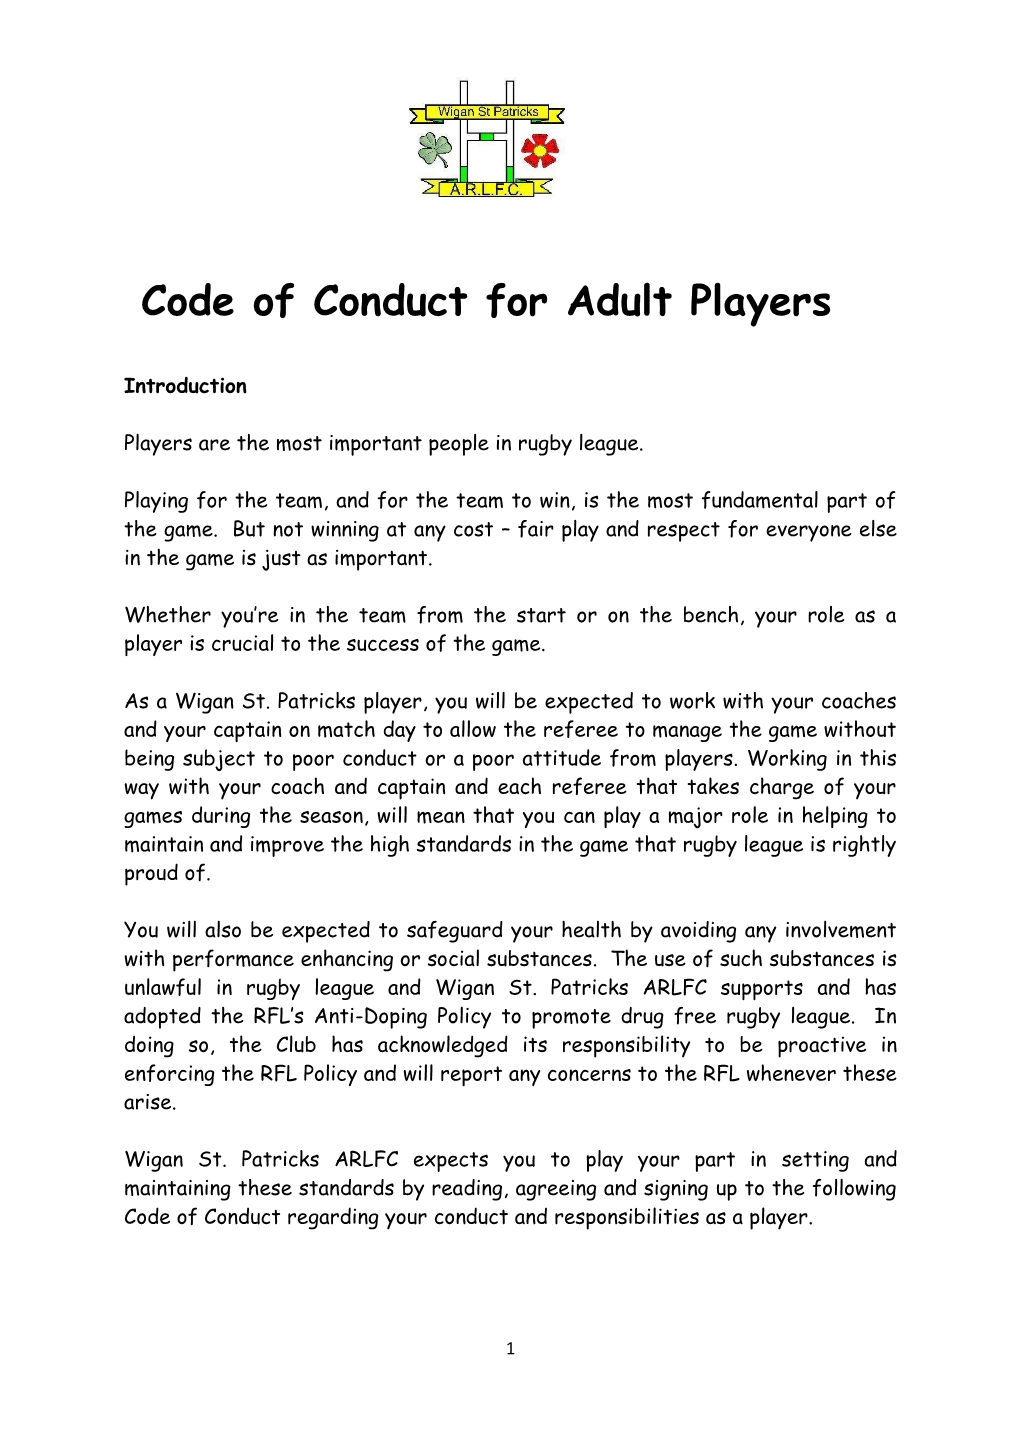 Code of Conduct for Adult Players